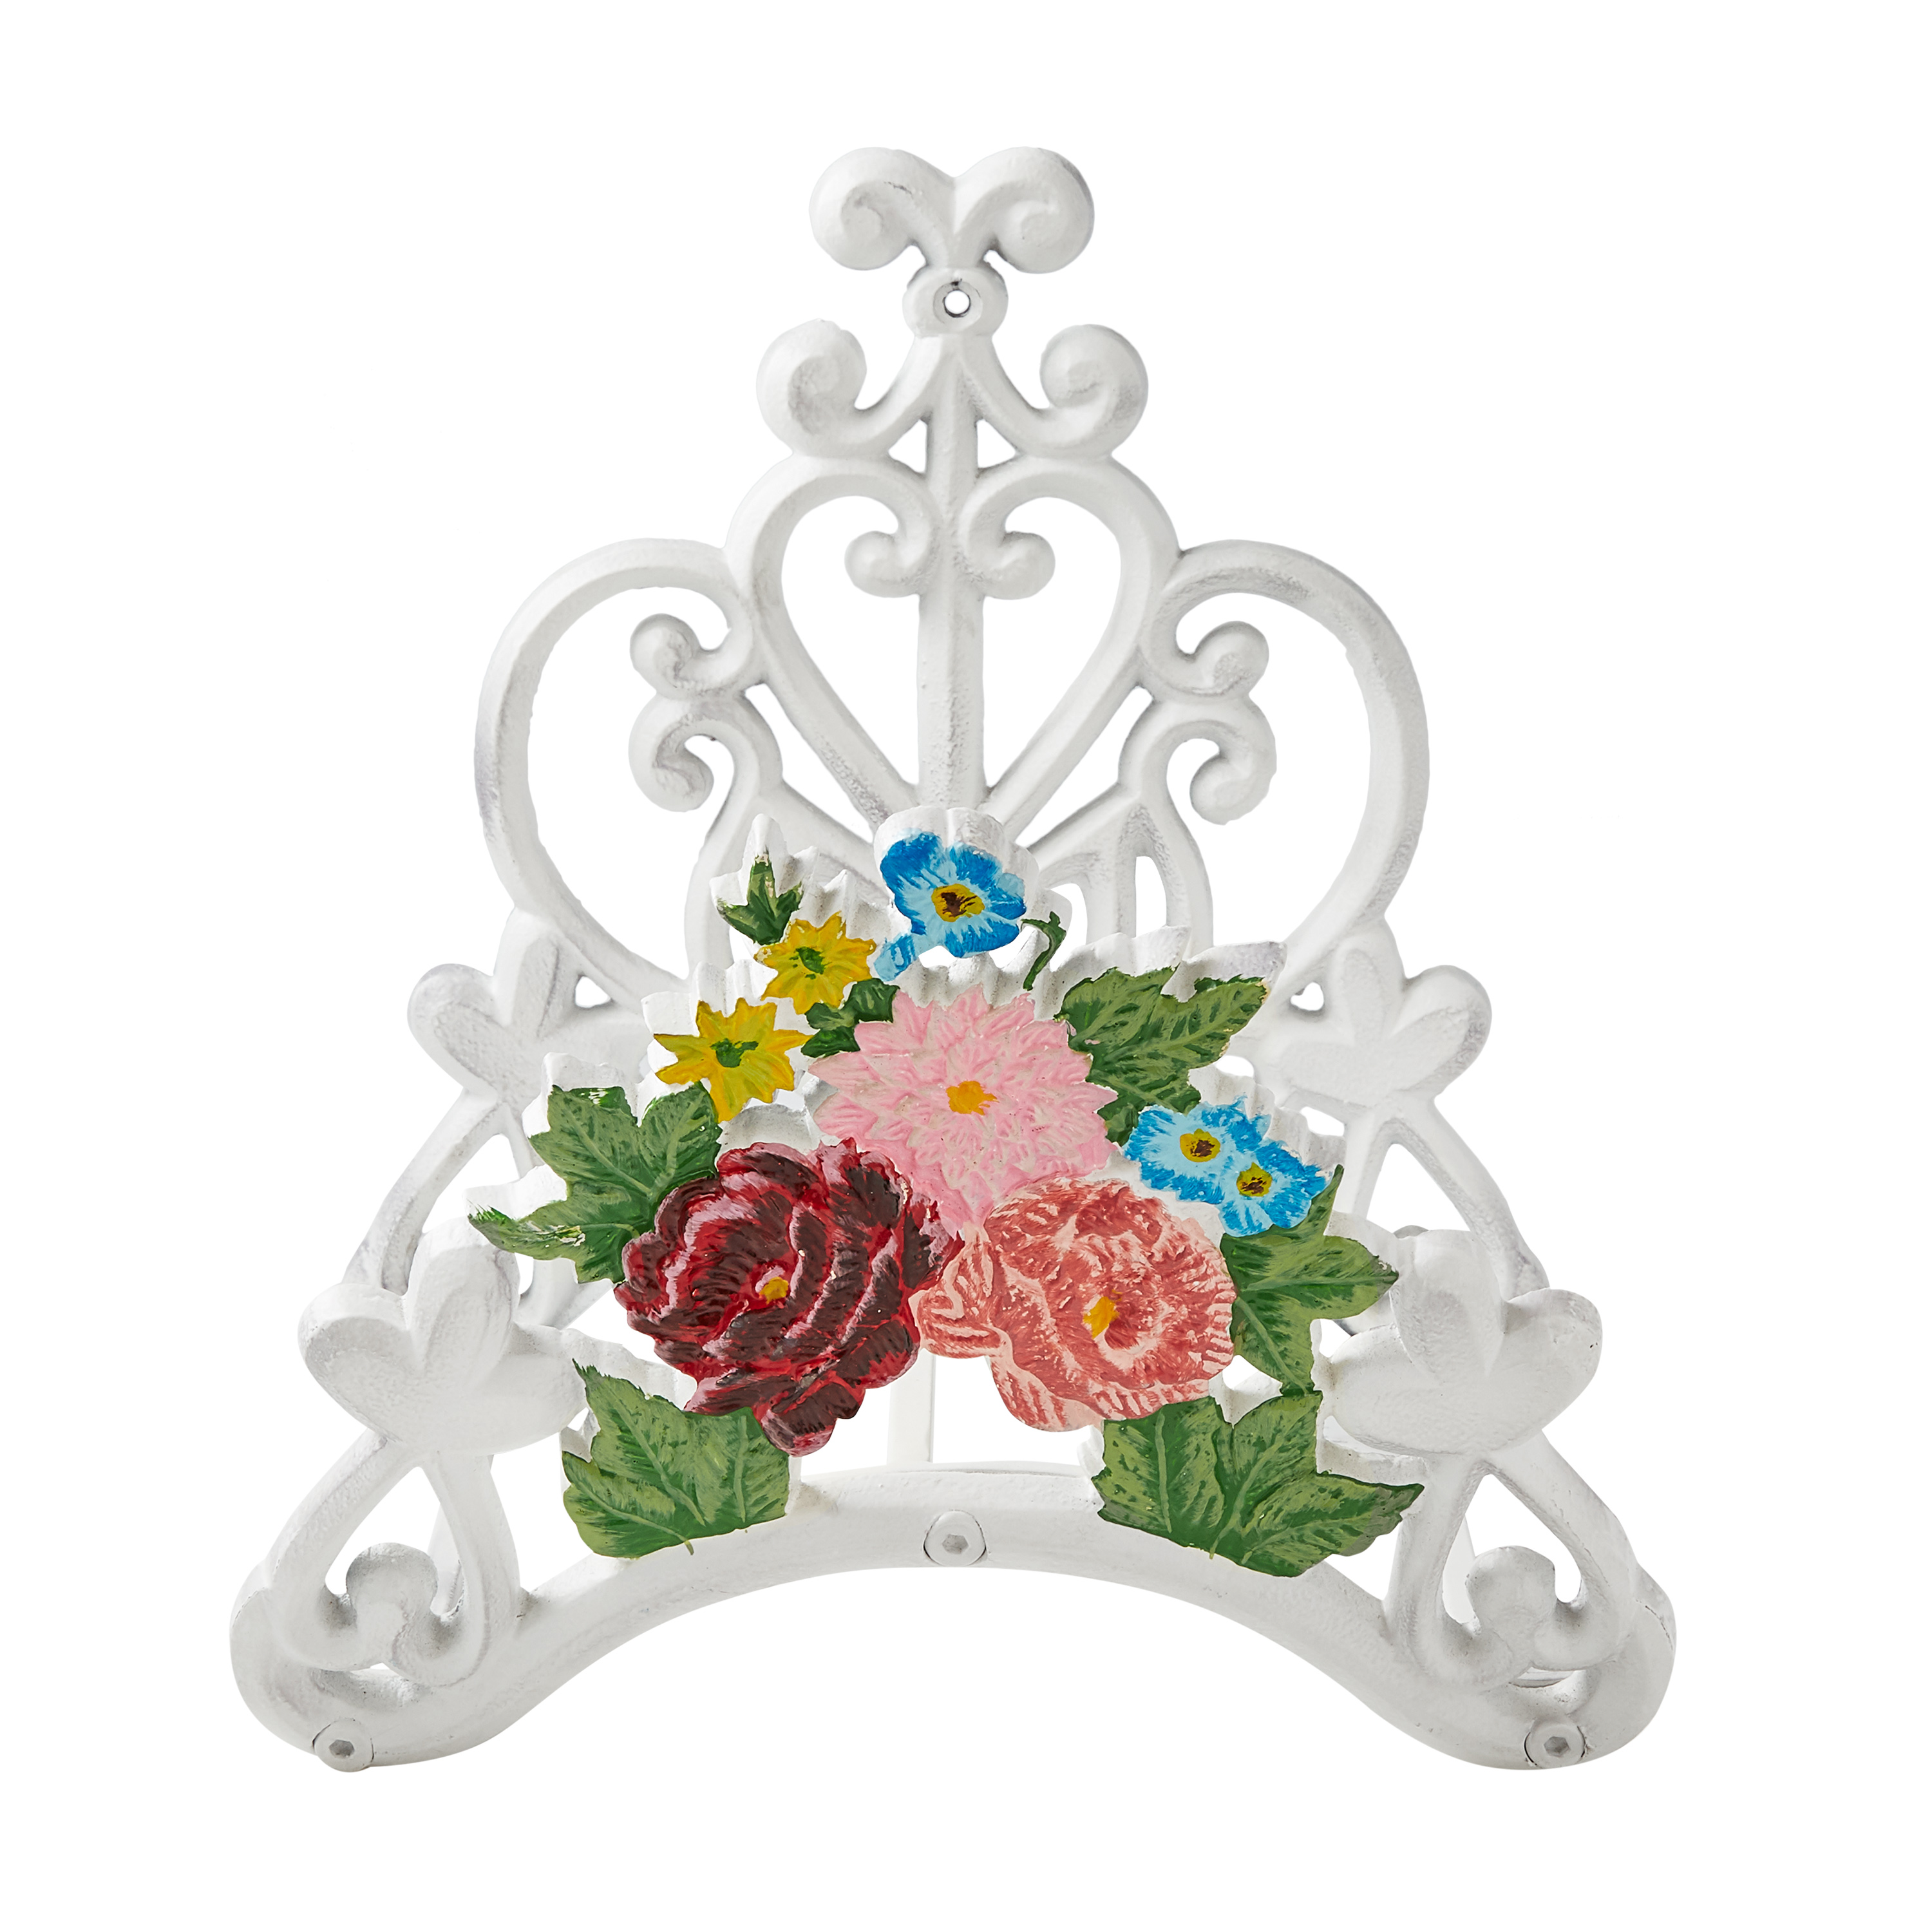 The Pioneer Woman Decorative Metal Floral Hose Hanger, White - image 1 of 7